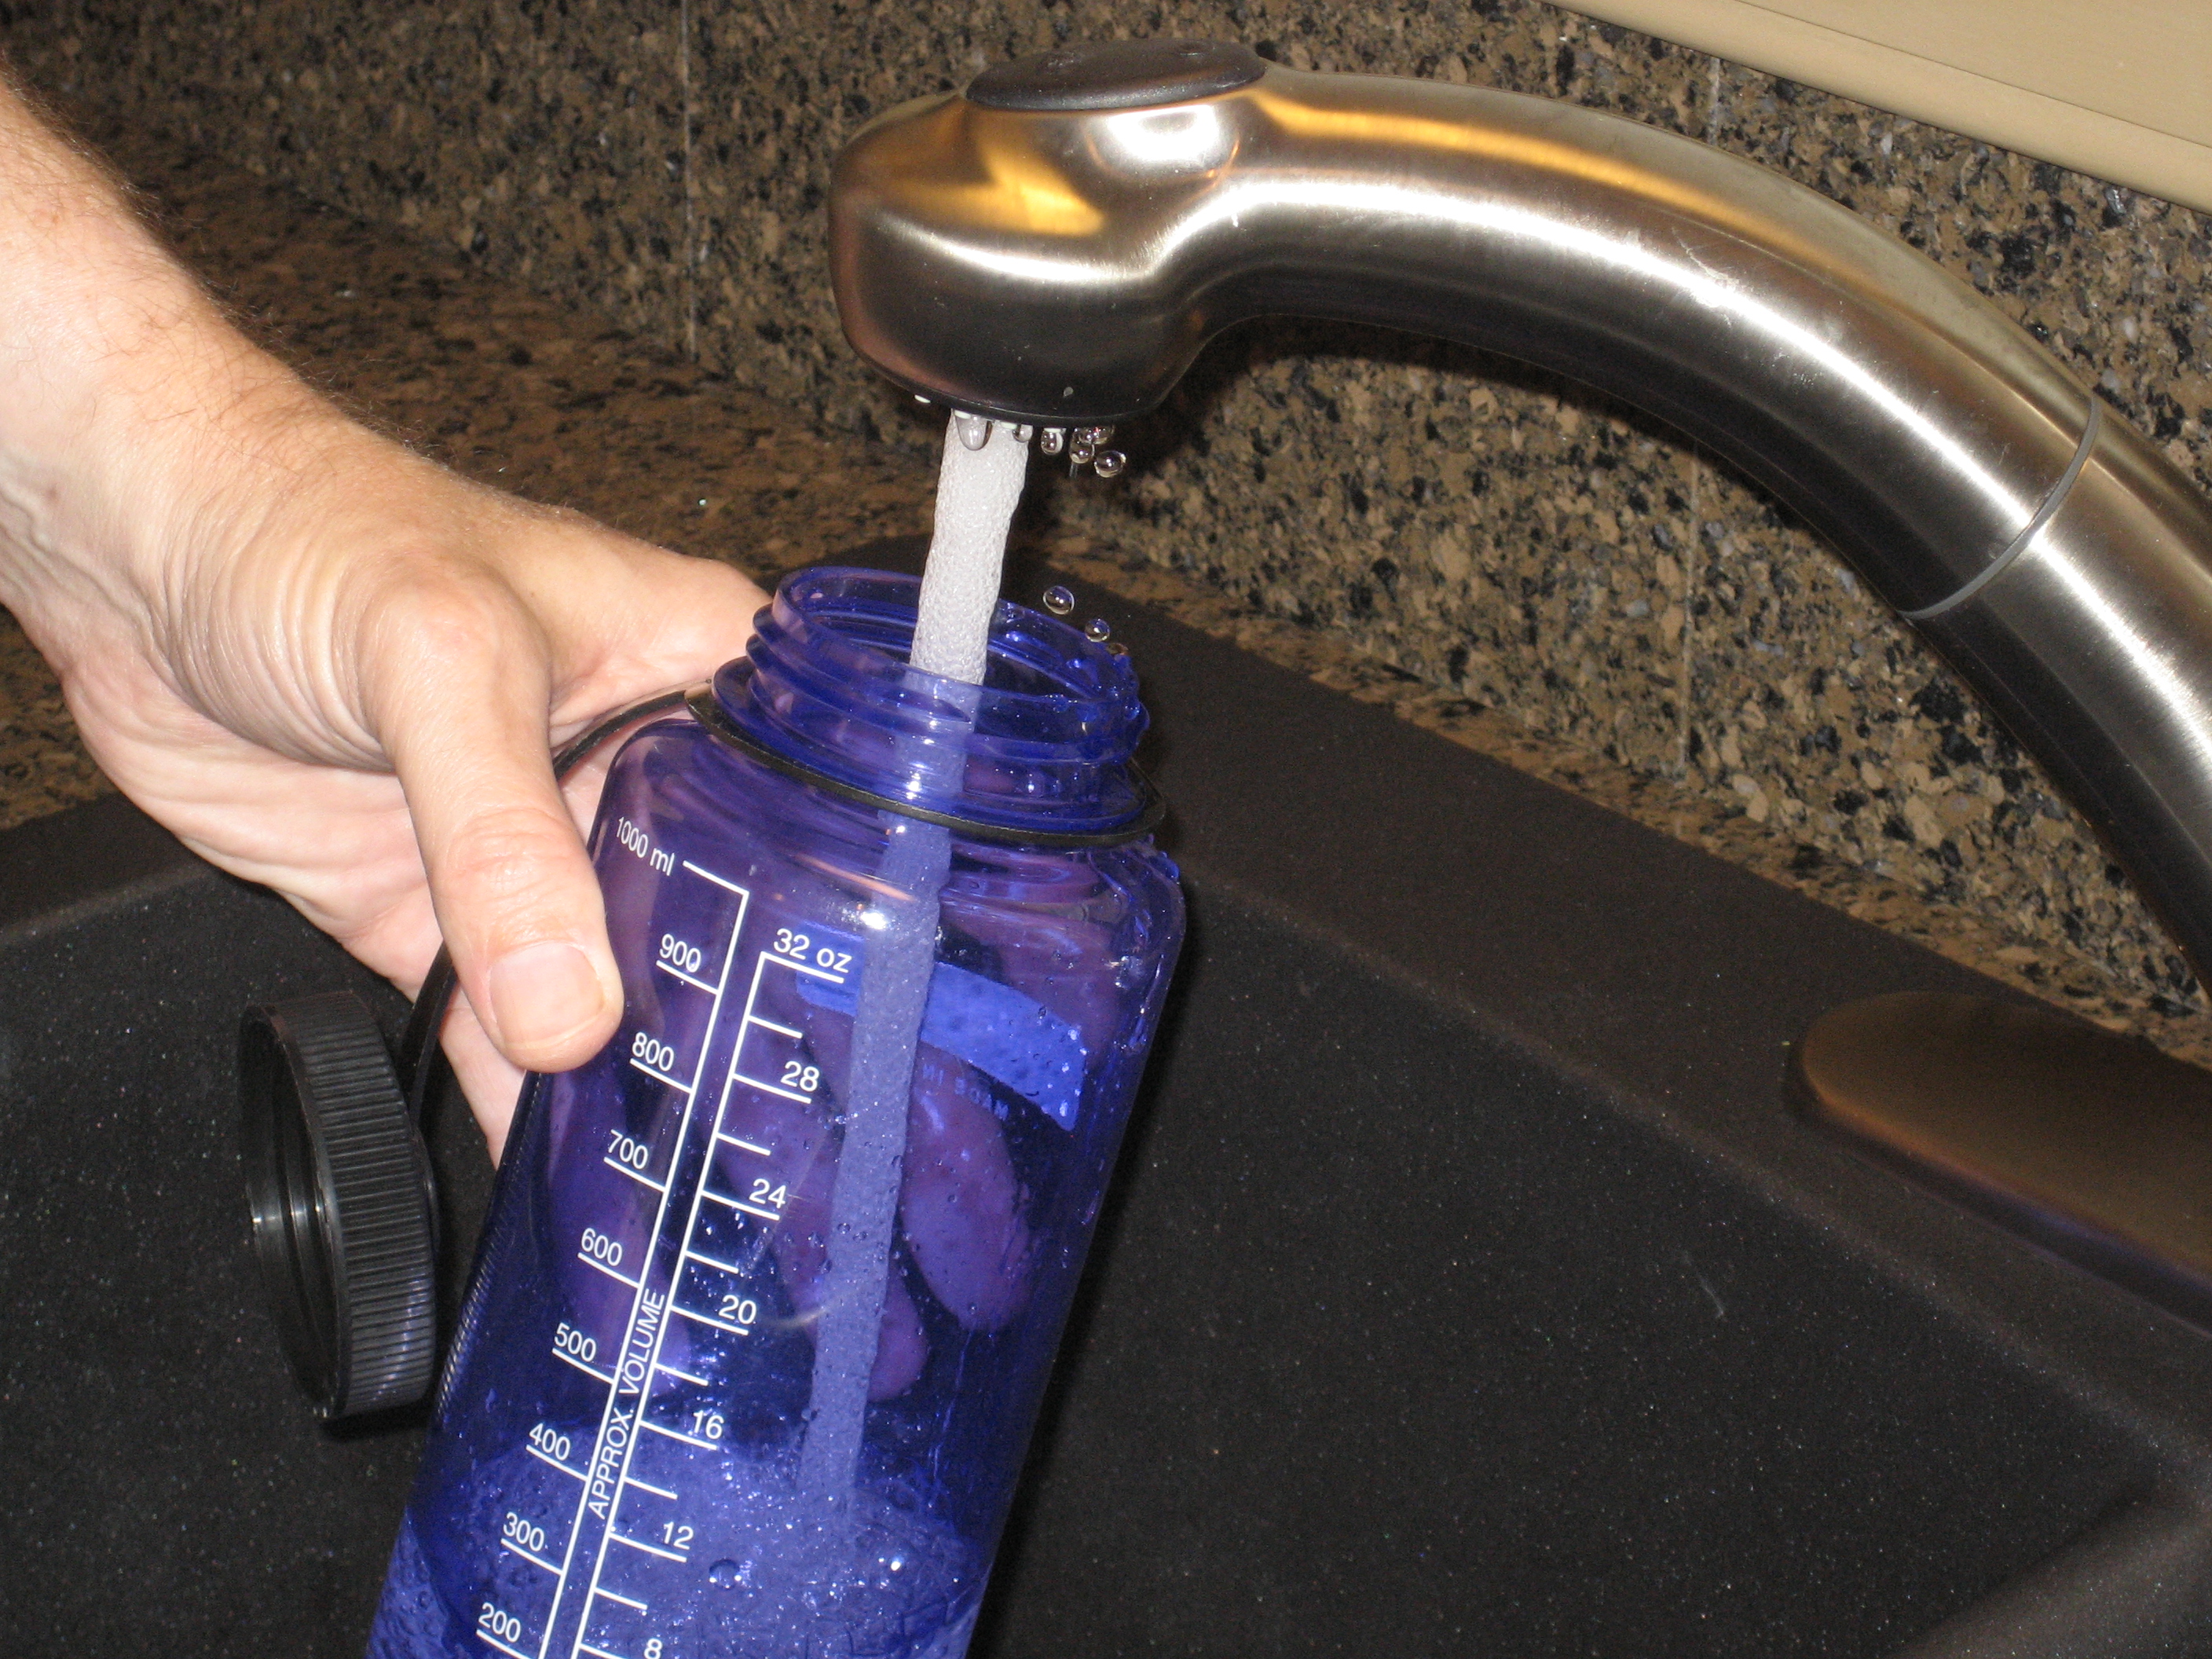 A water bottle being filled at a sink faucet